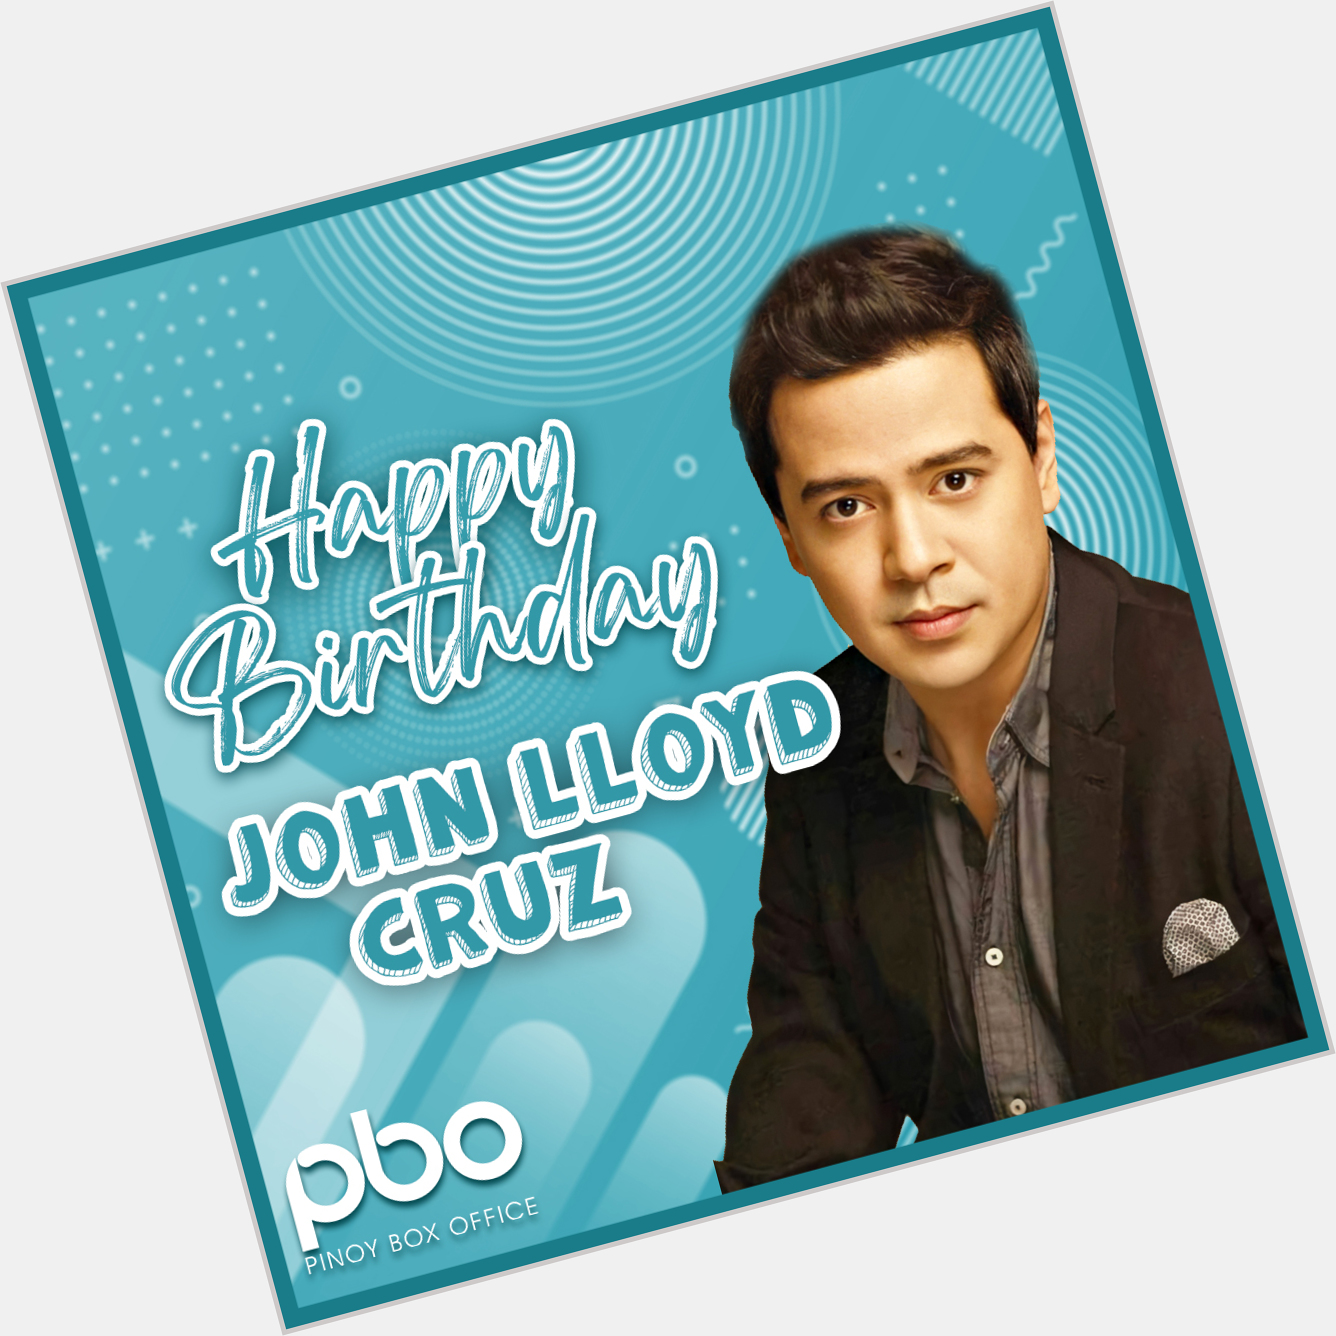 Happy birthday, John LLoyd Cruz! May your special day be amazing, wonderful, and unforgettable as you are! 